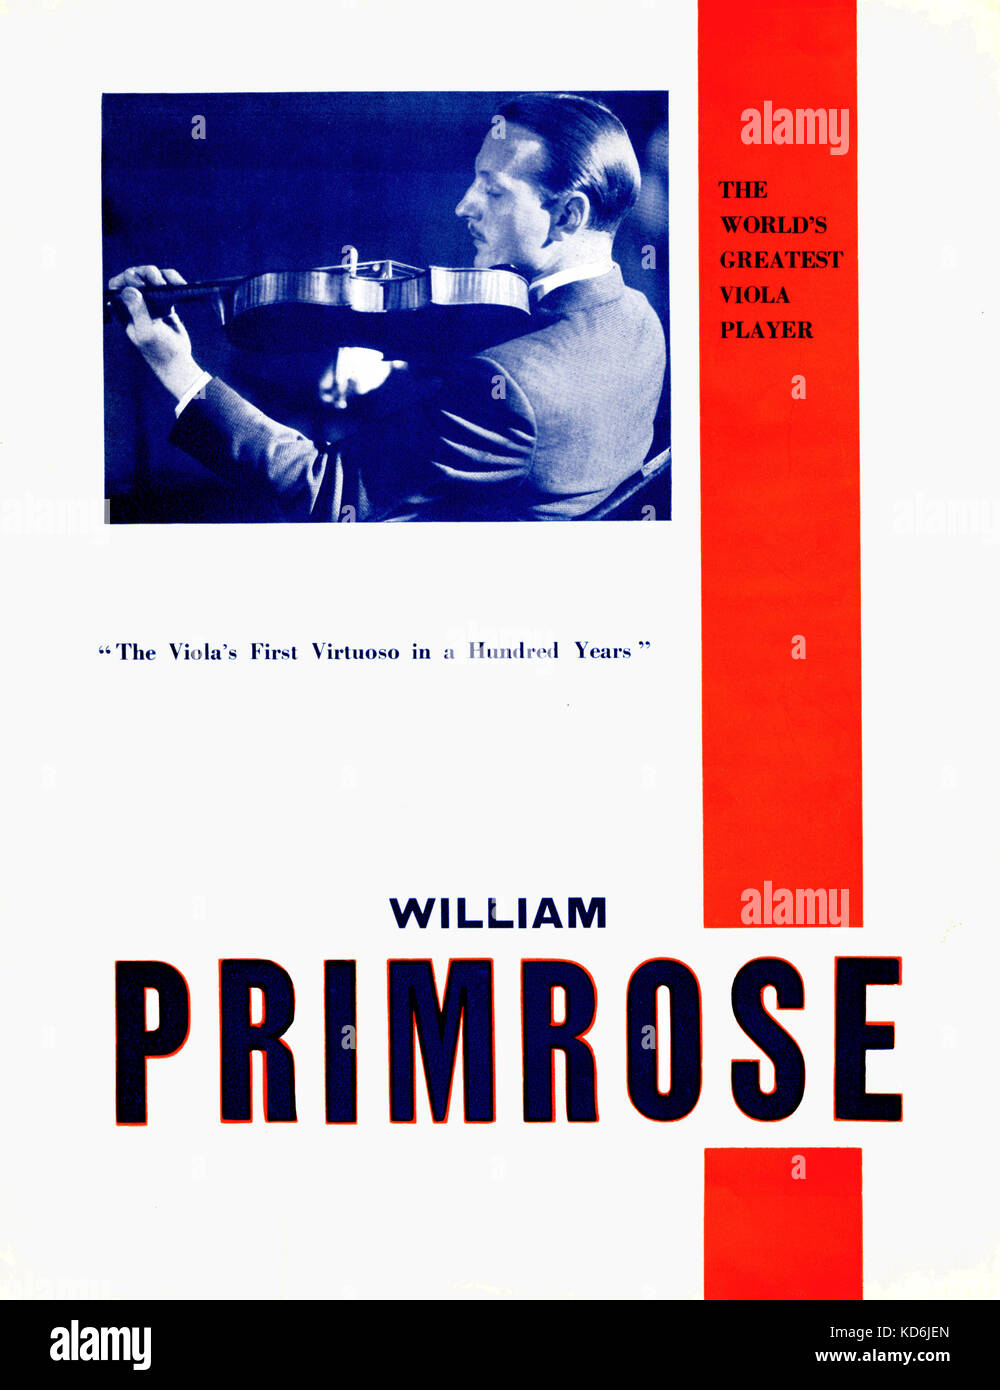 William Primrose concert programme.  Caption reads "The Viola's First Virtuoso in a Hundred Years"/ "The World's Greatest Viola Player".  Scottish viola virtuoso, 1903-1982.